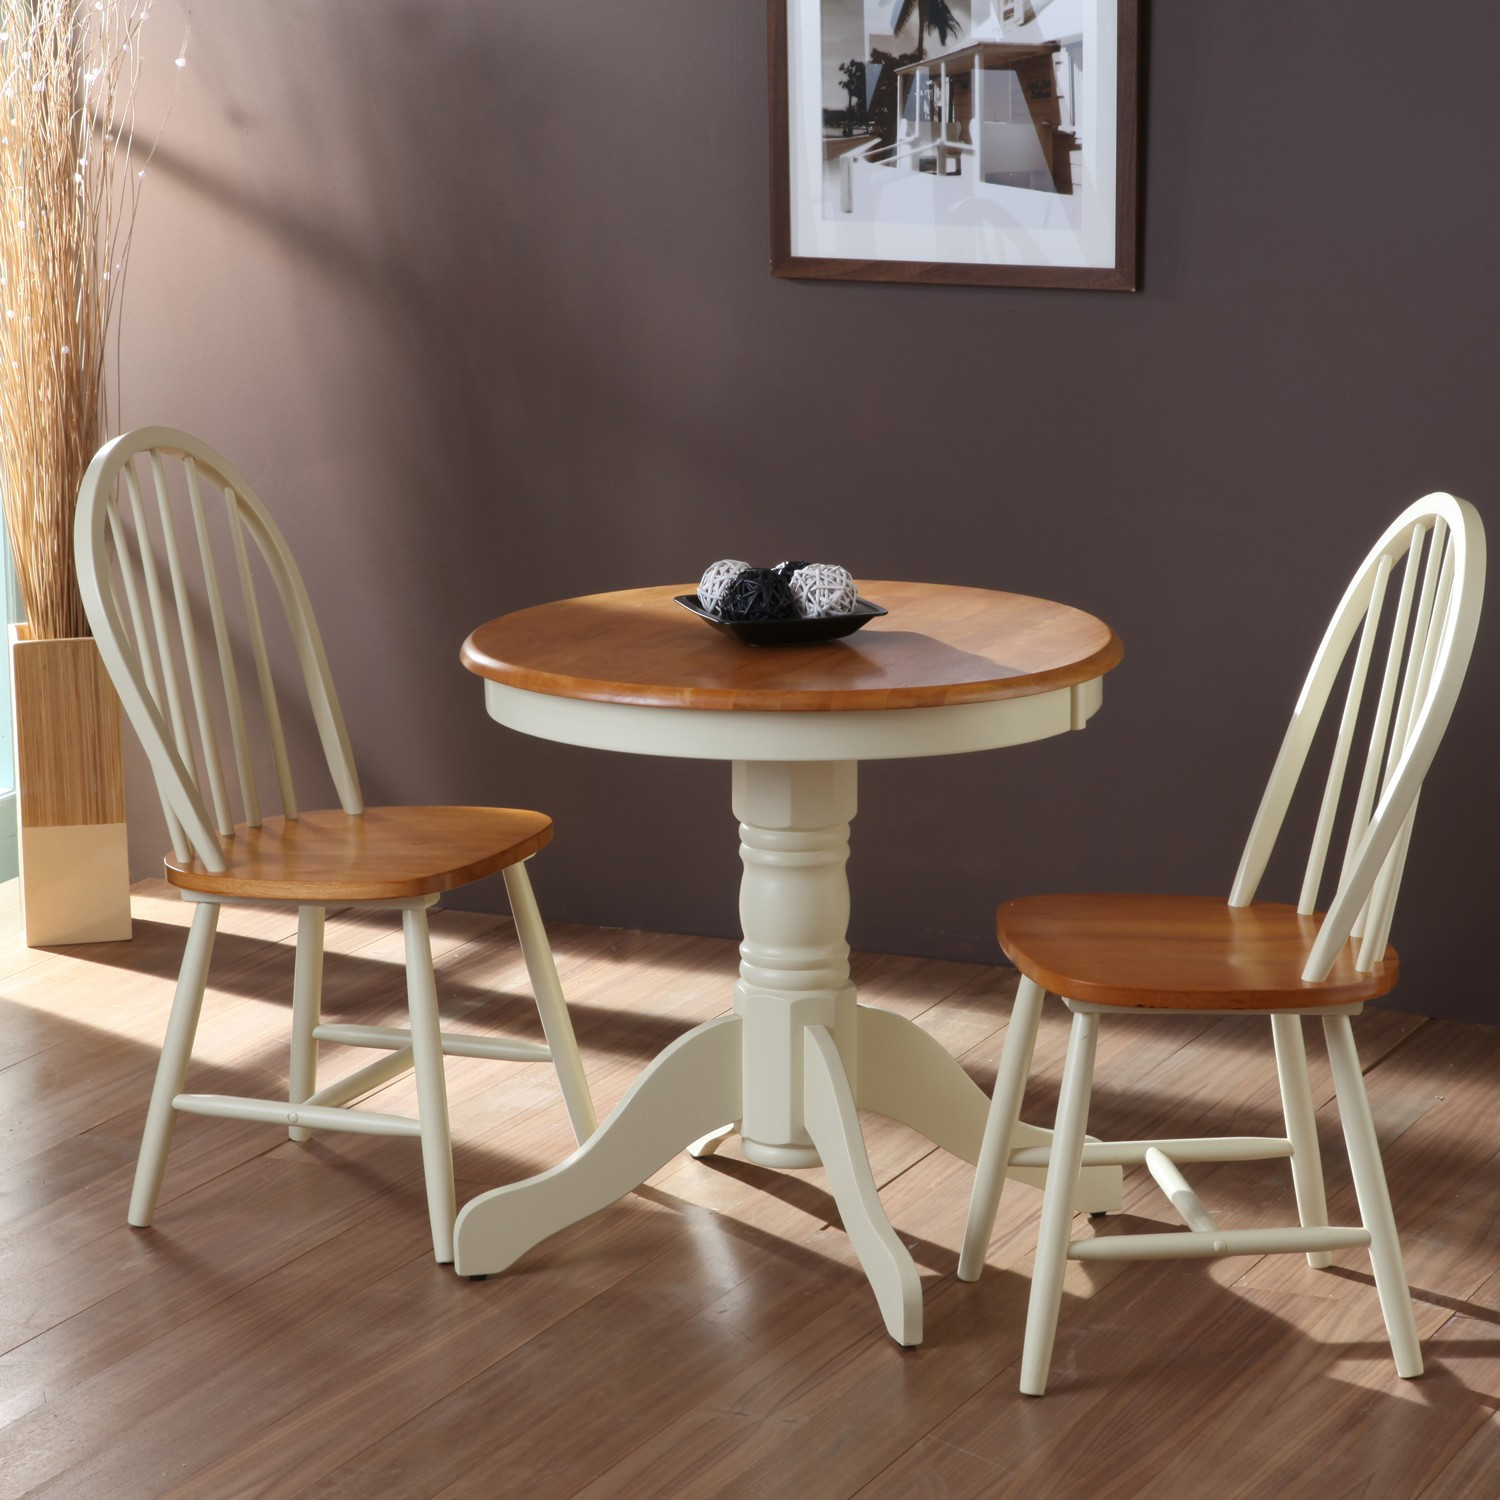 Small Round Kitchen Tables Awesome Beautiful White Round Kitchen Table and Chairs – Homesfeed